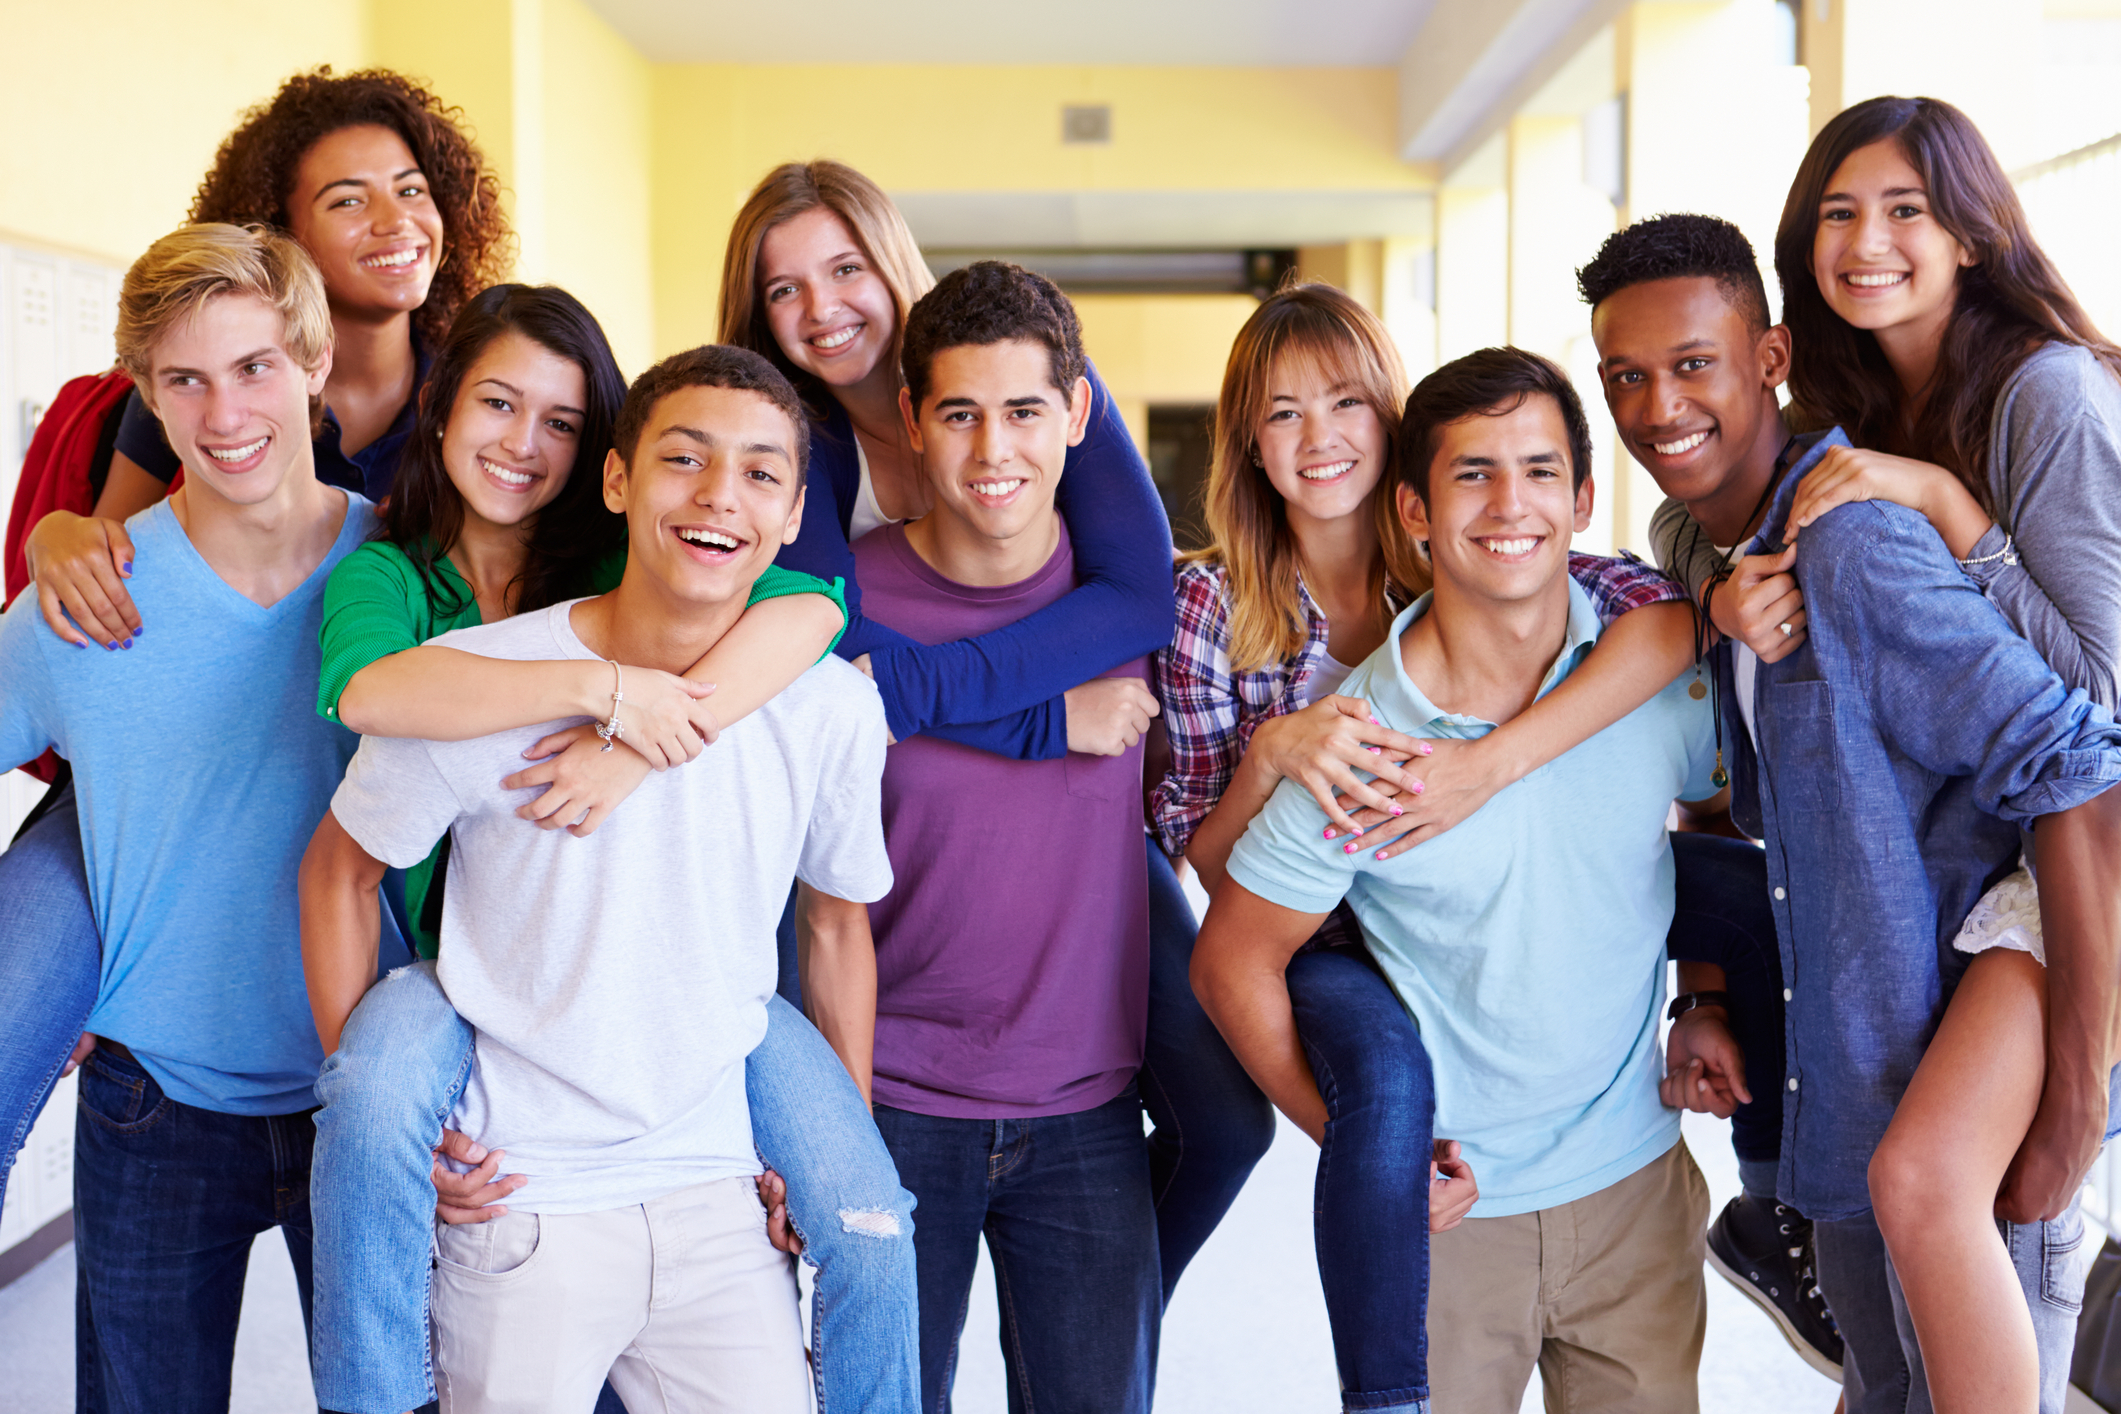 http://www.dreamstime.com/stock-images-group-high-school-students-giving-piggybacks-corridor-close-up-image-smiling-image41525284